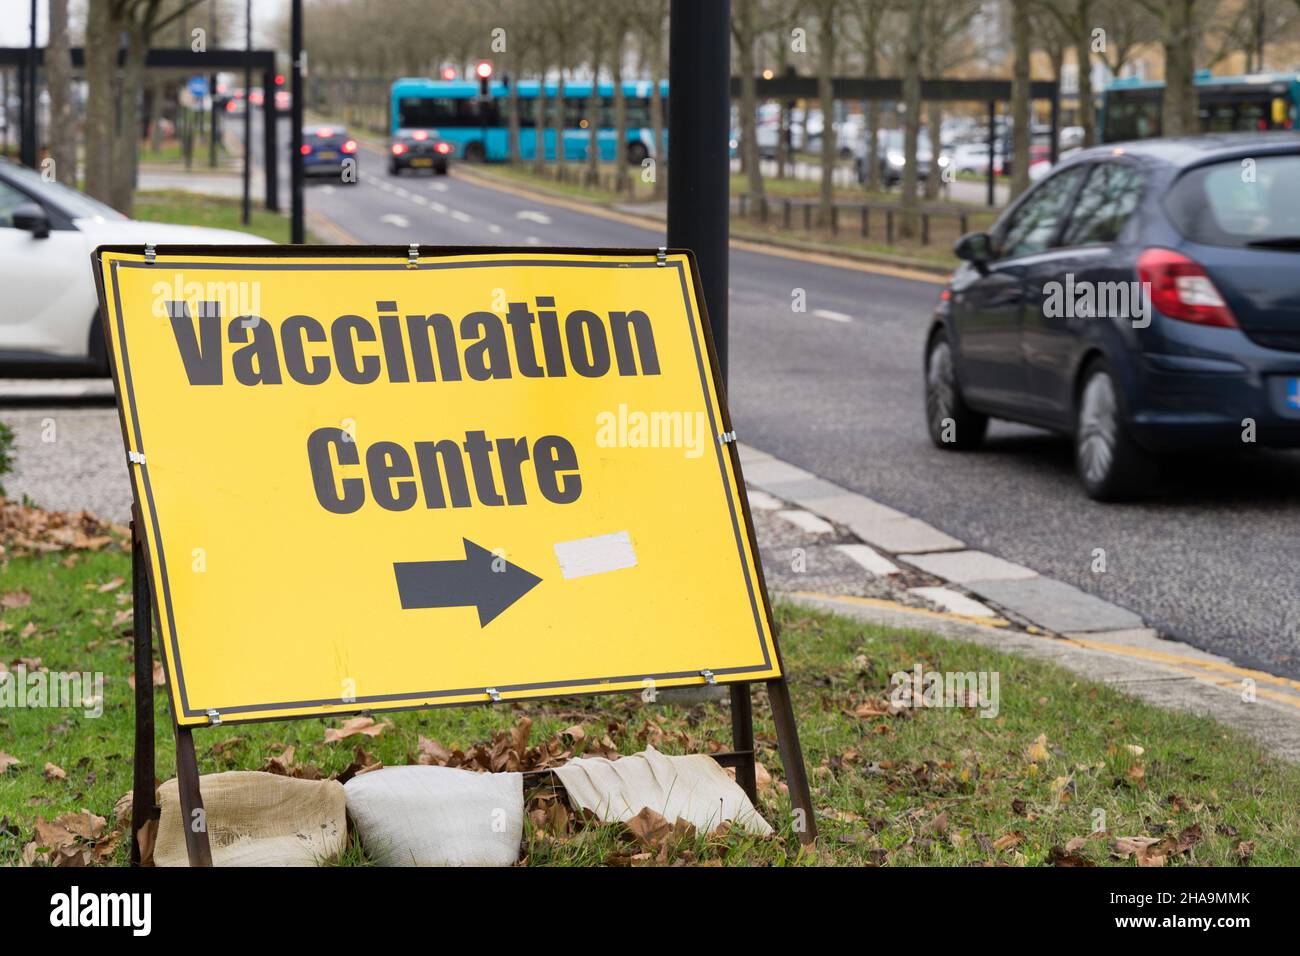 Milton Keynes, UK. 11th Dec, 2021. COVID-19 vaccination Centre road sign posted , welcome general public to take Coronavirus vaccine to combat the latest Omicron variant among the other variants in the Borough of Milton Keynes in Buckinghamshire England. Credit: xiu bao/Alamy Live News Stock Photo